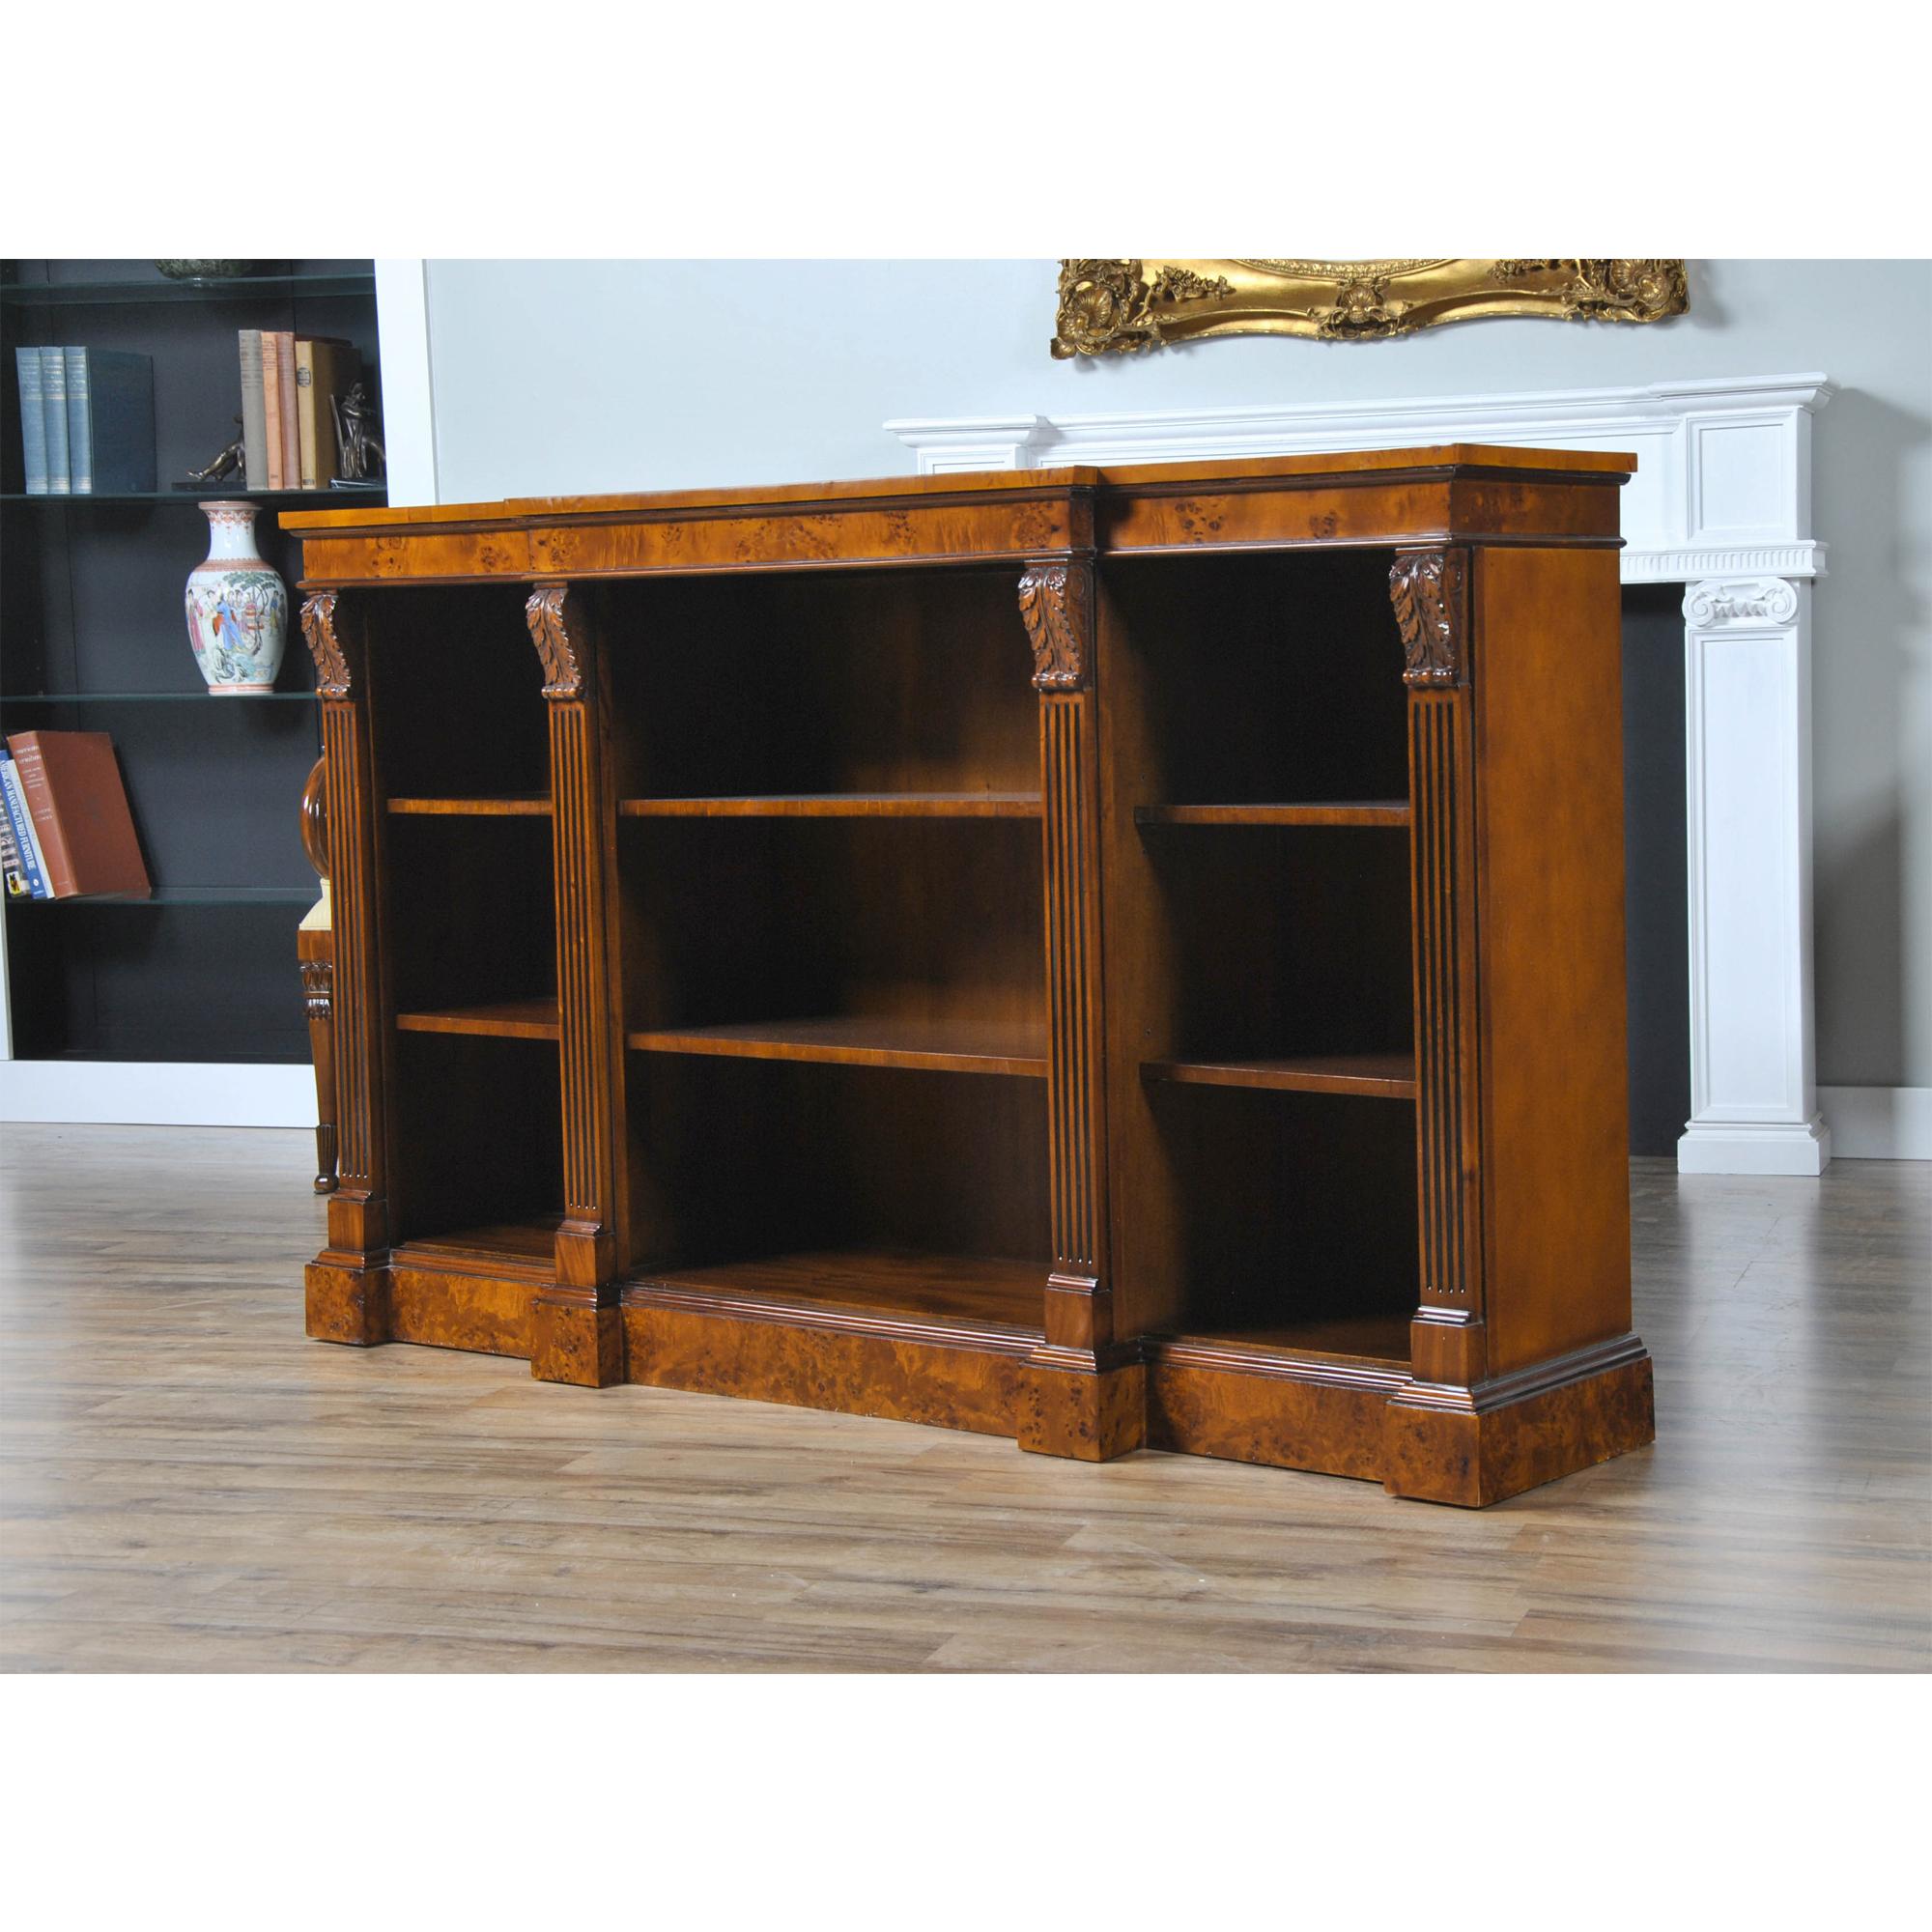 The Niagara Furniture Small Burled Penshurst Bookcase with two shelves. The burled cornice is beautiful and adds a sense of depth to the upper area of the case while hand carved acanthus style, solid mahogany brackets and reeded columns lend a sense